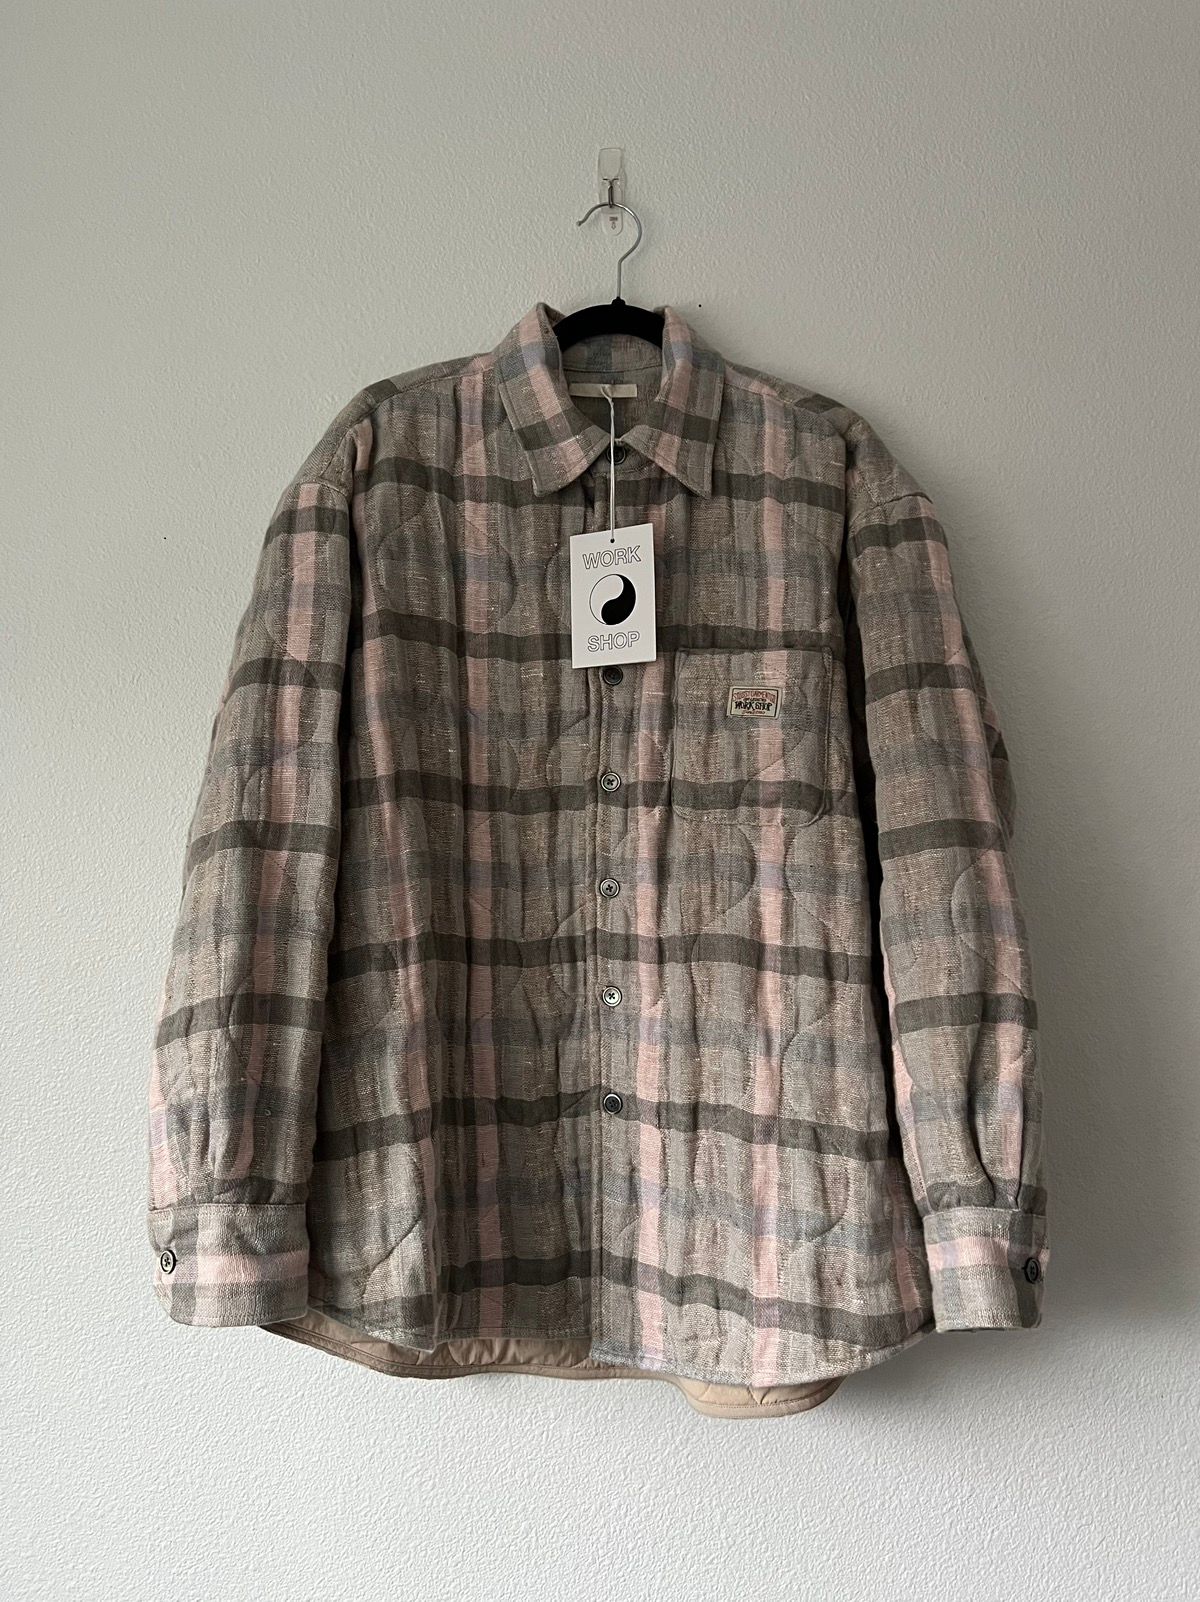 Our Legacy Borrowed Jacket Pale Linen Check Beige Pink Size US S / EU 44-46 / 1 - 1 Preview